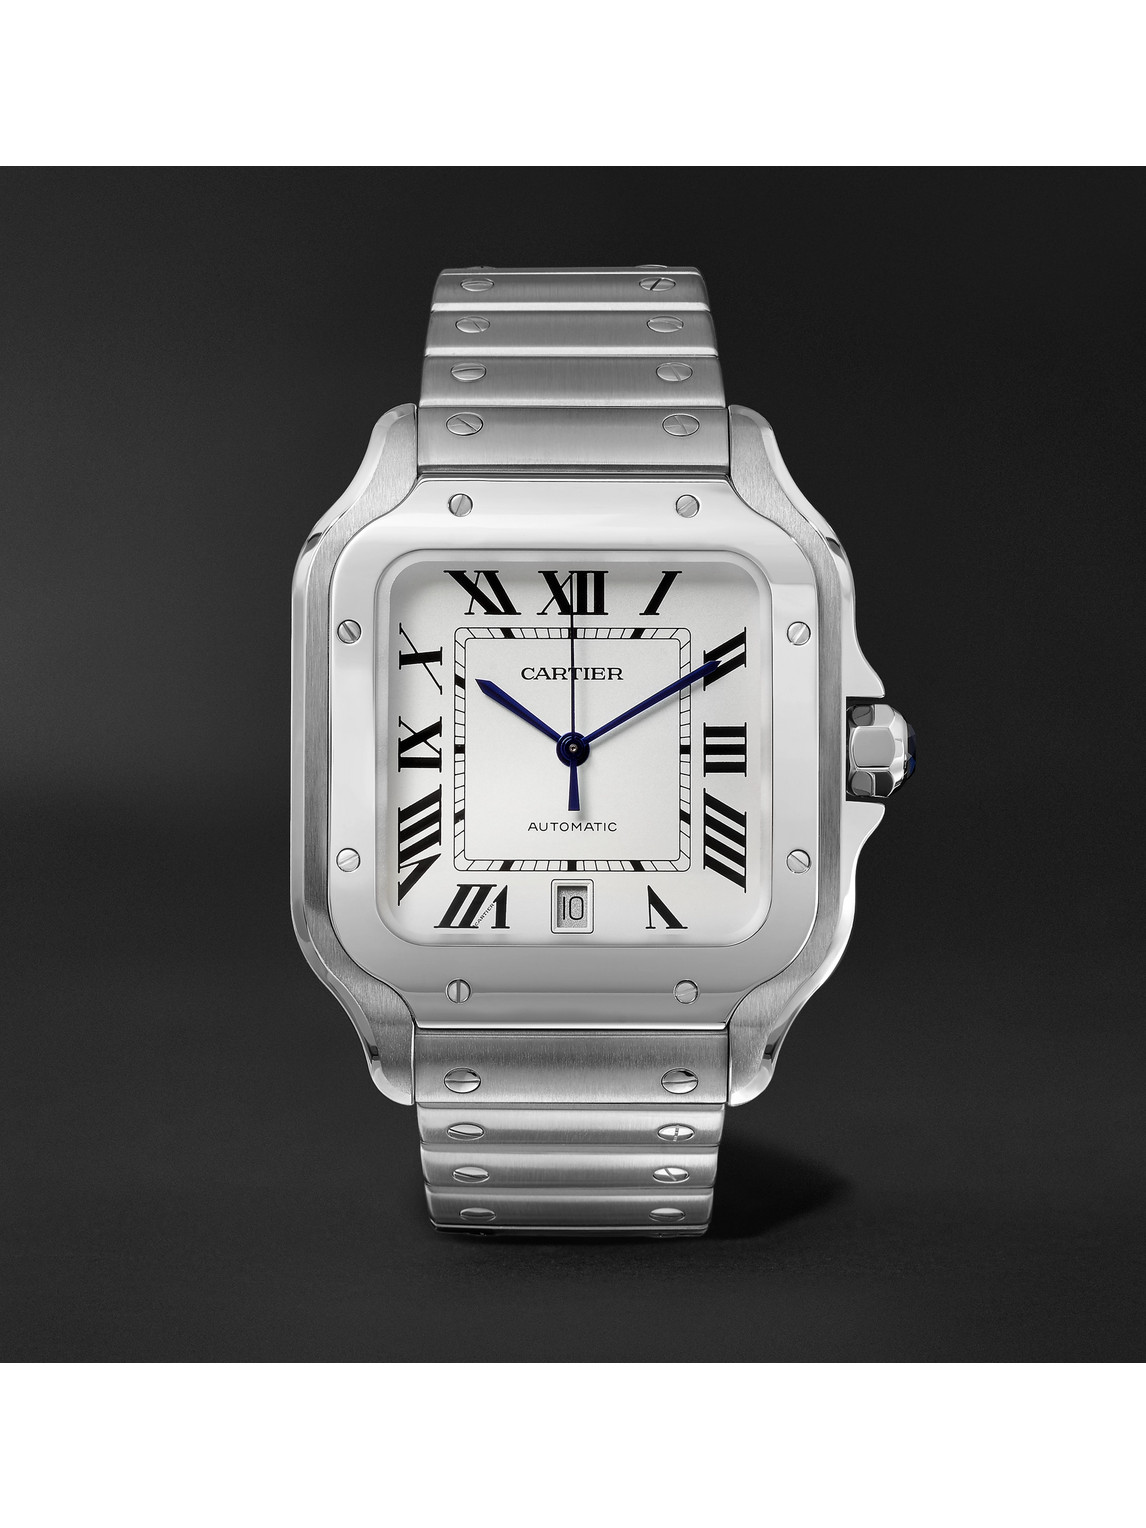 Cartier Santos Automatic 39.8mm Interchangeable Stainless Steel And Leather Watch , Ref. No. Wssa0009 In White